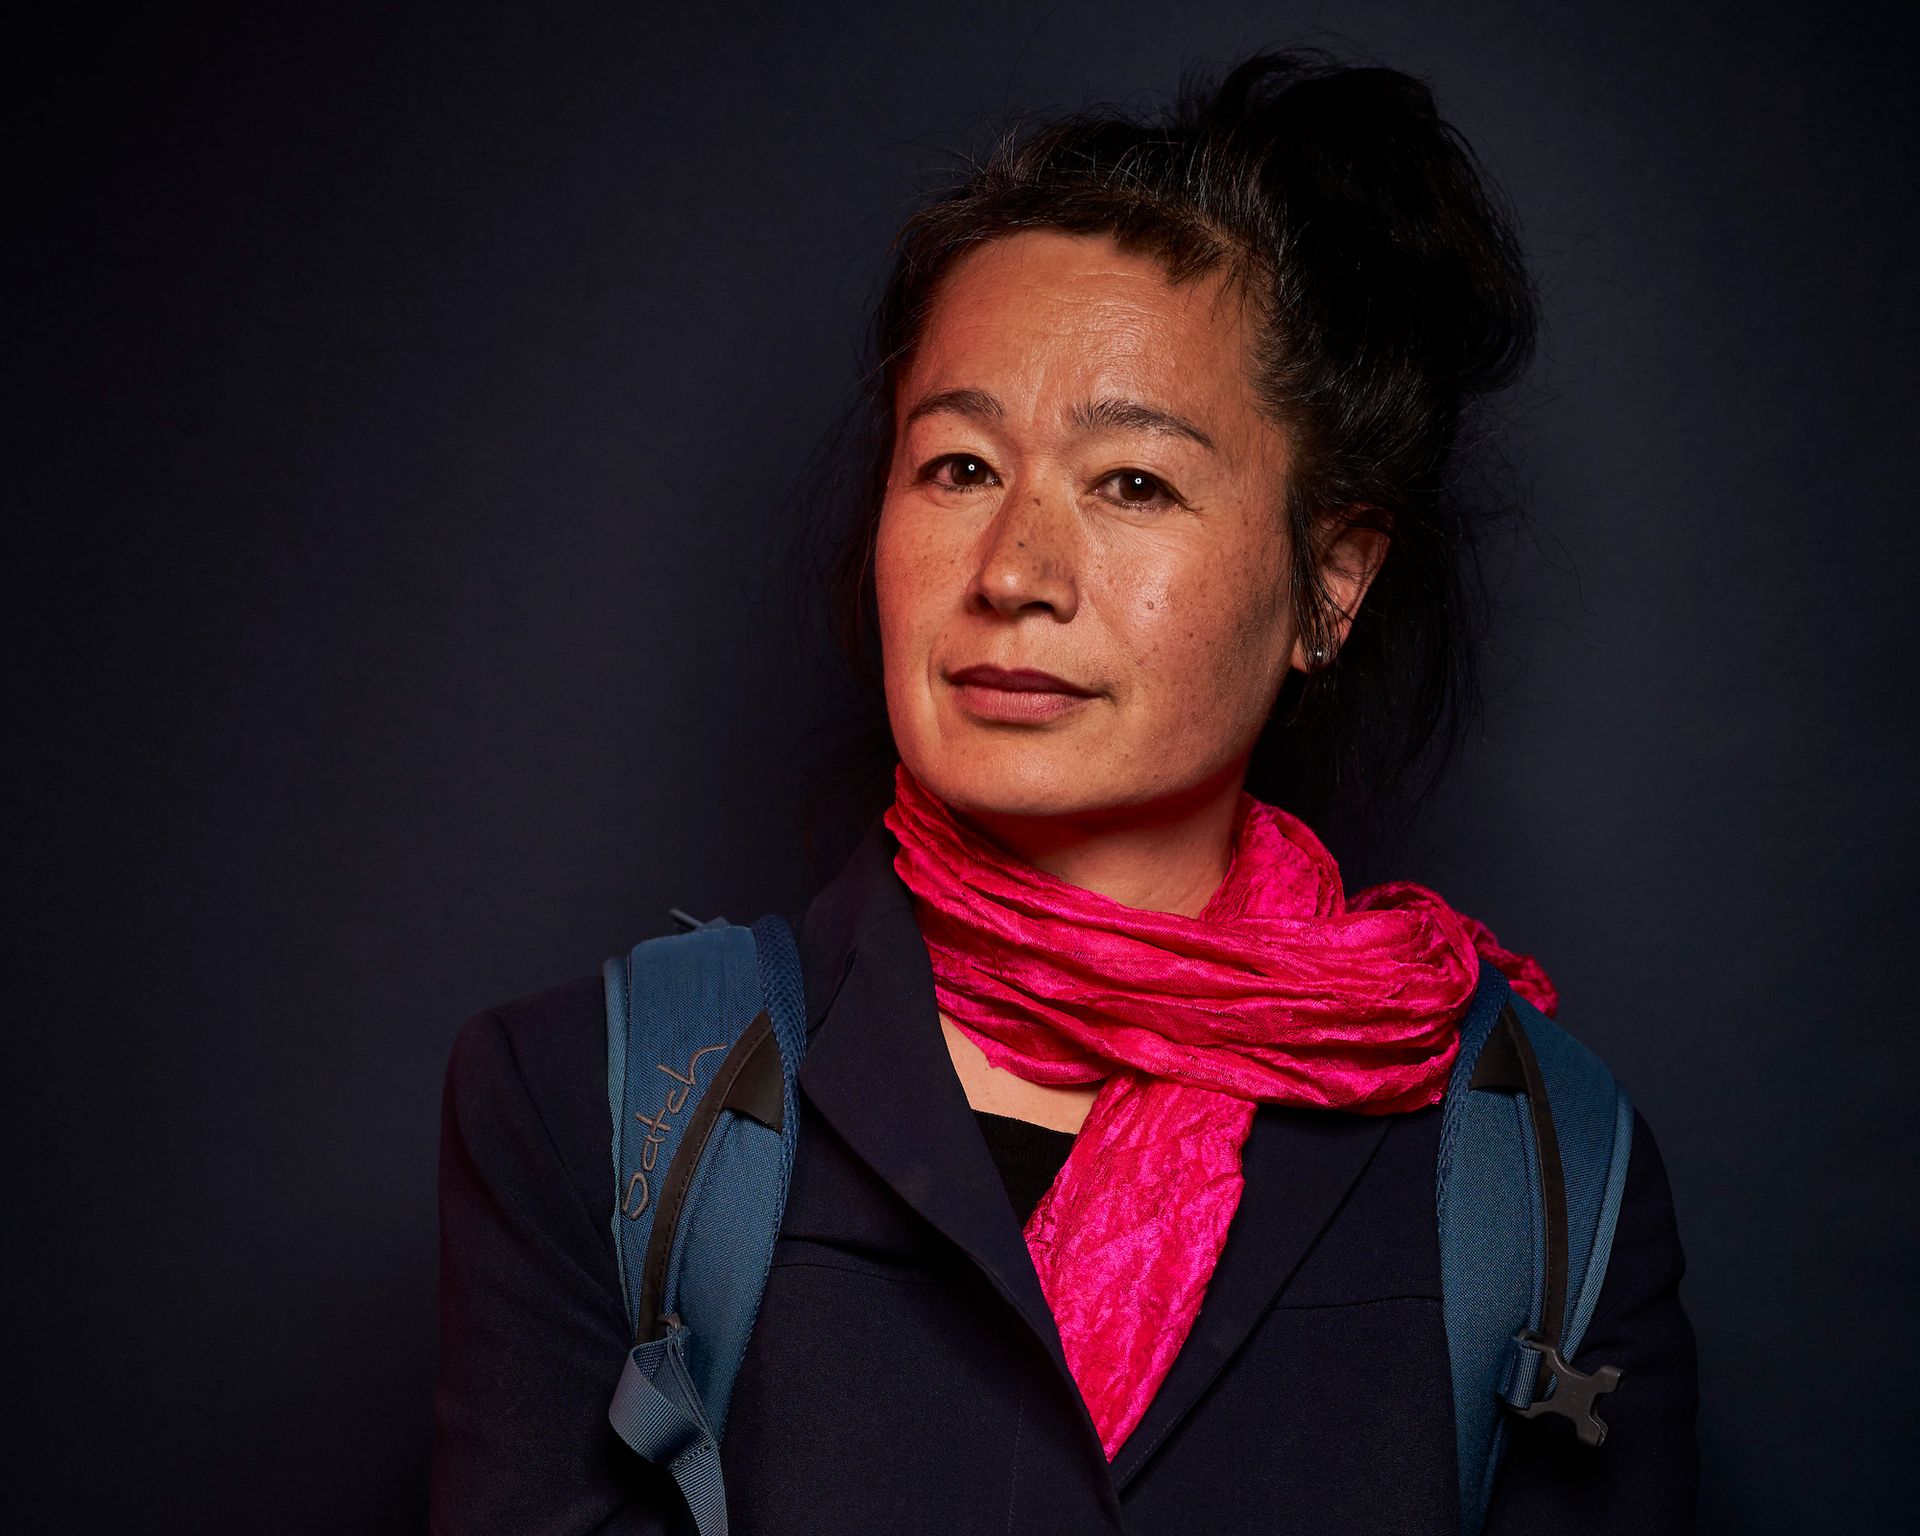 Artist Hito Steyerl, pitcured at the Future Affairs Berlin 2019 conference organised by re:publica. Photo by Dominik Butzmann. Courtesy re:publica, via Flickr.